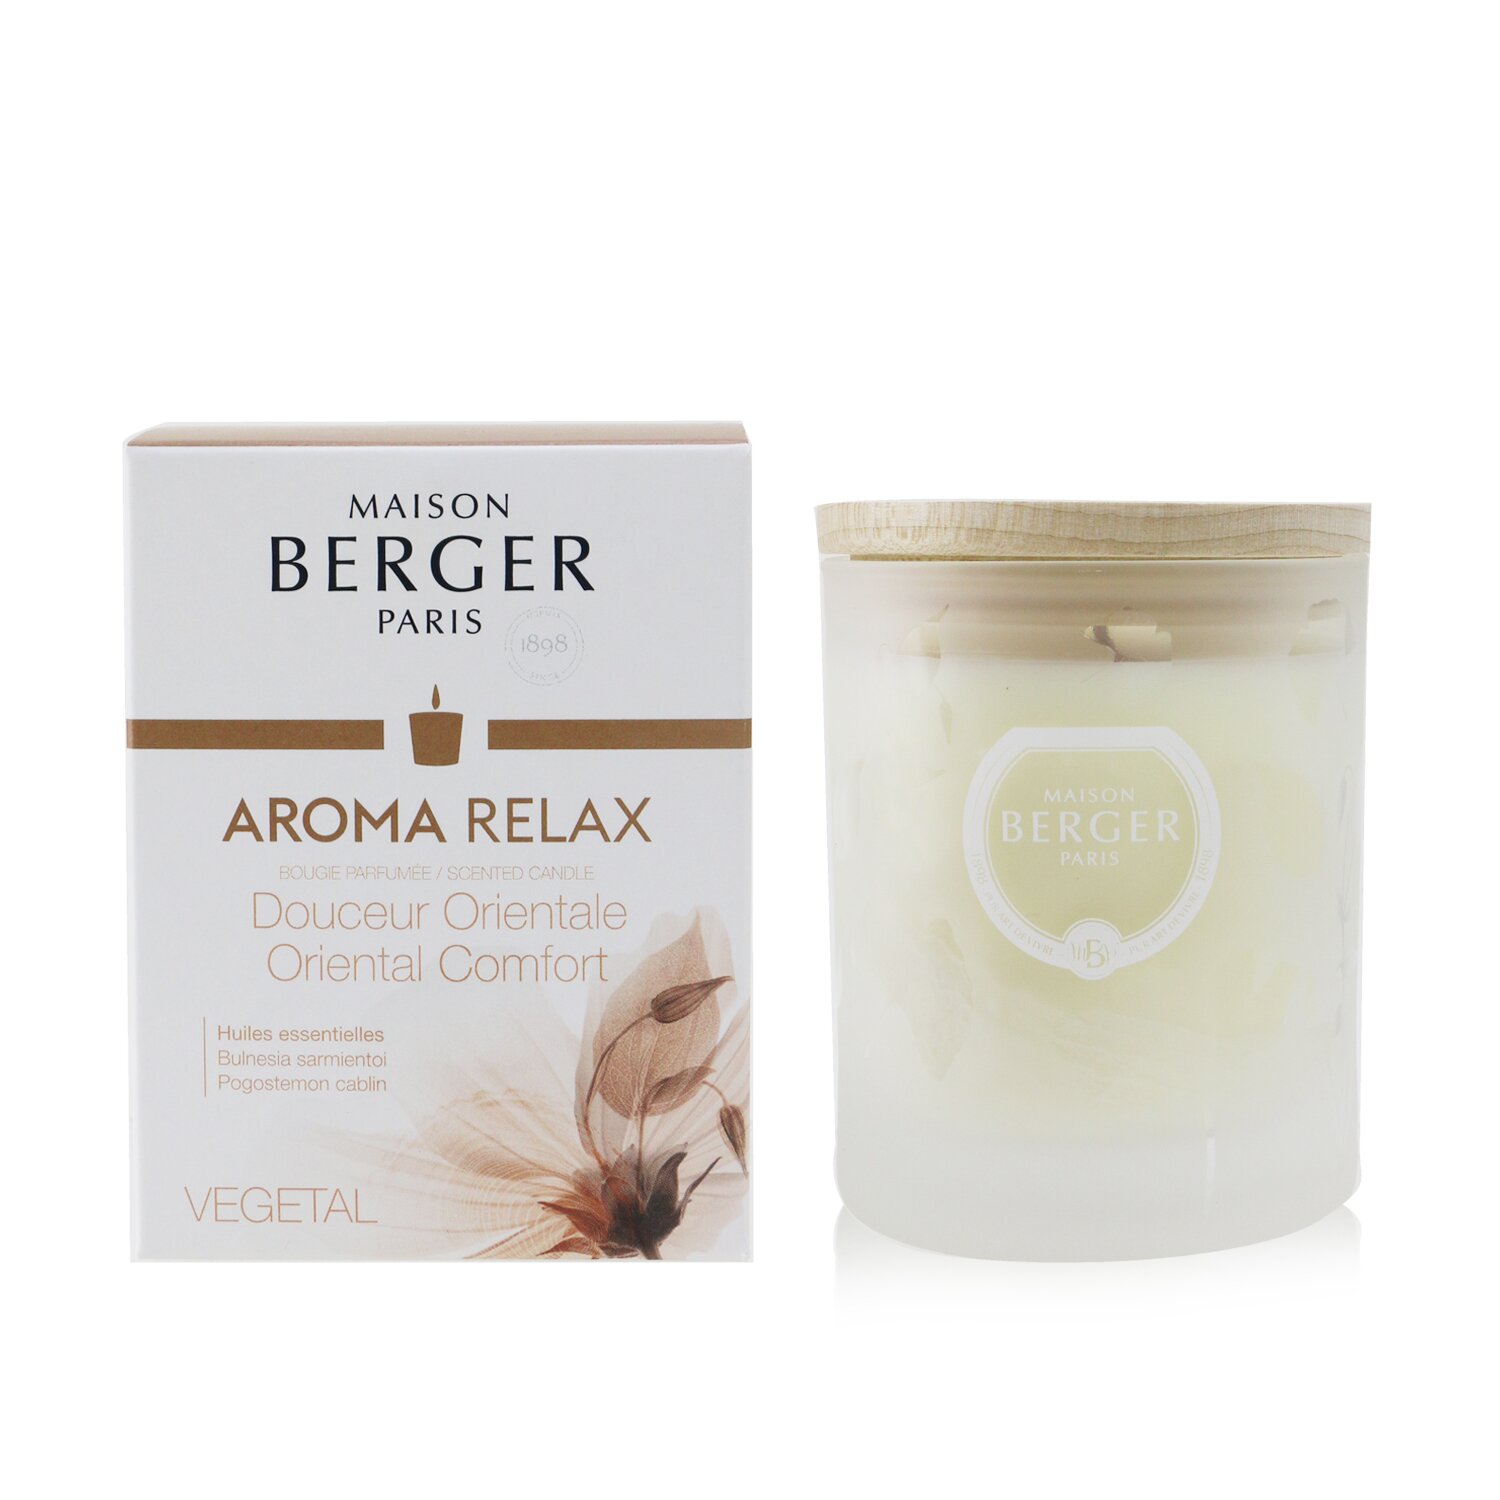 Lampe Berger Scented Candle - Aroma Relax 180g/6.3oz